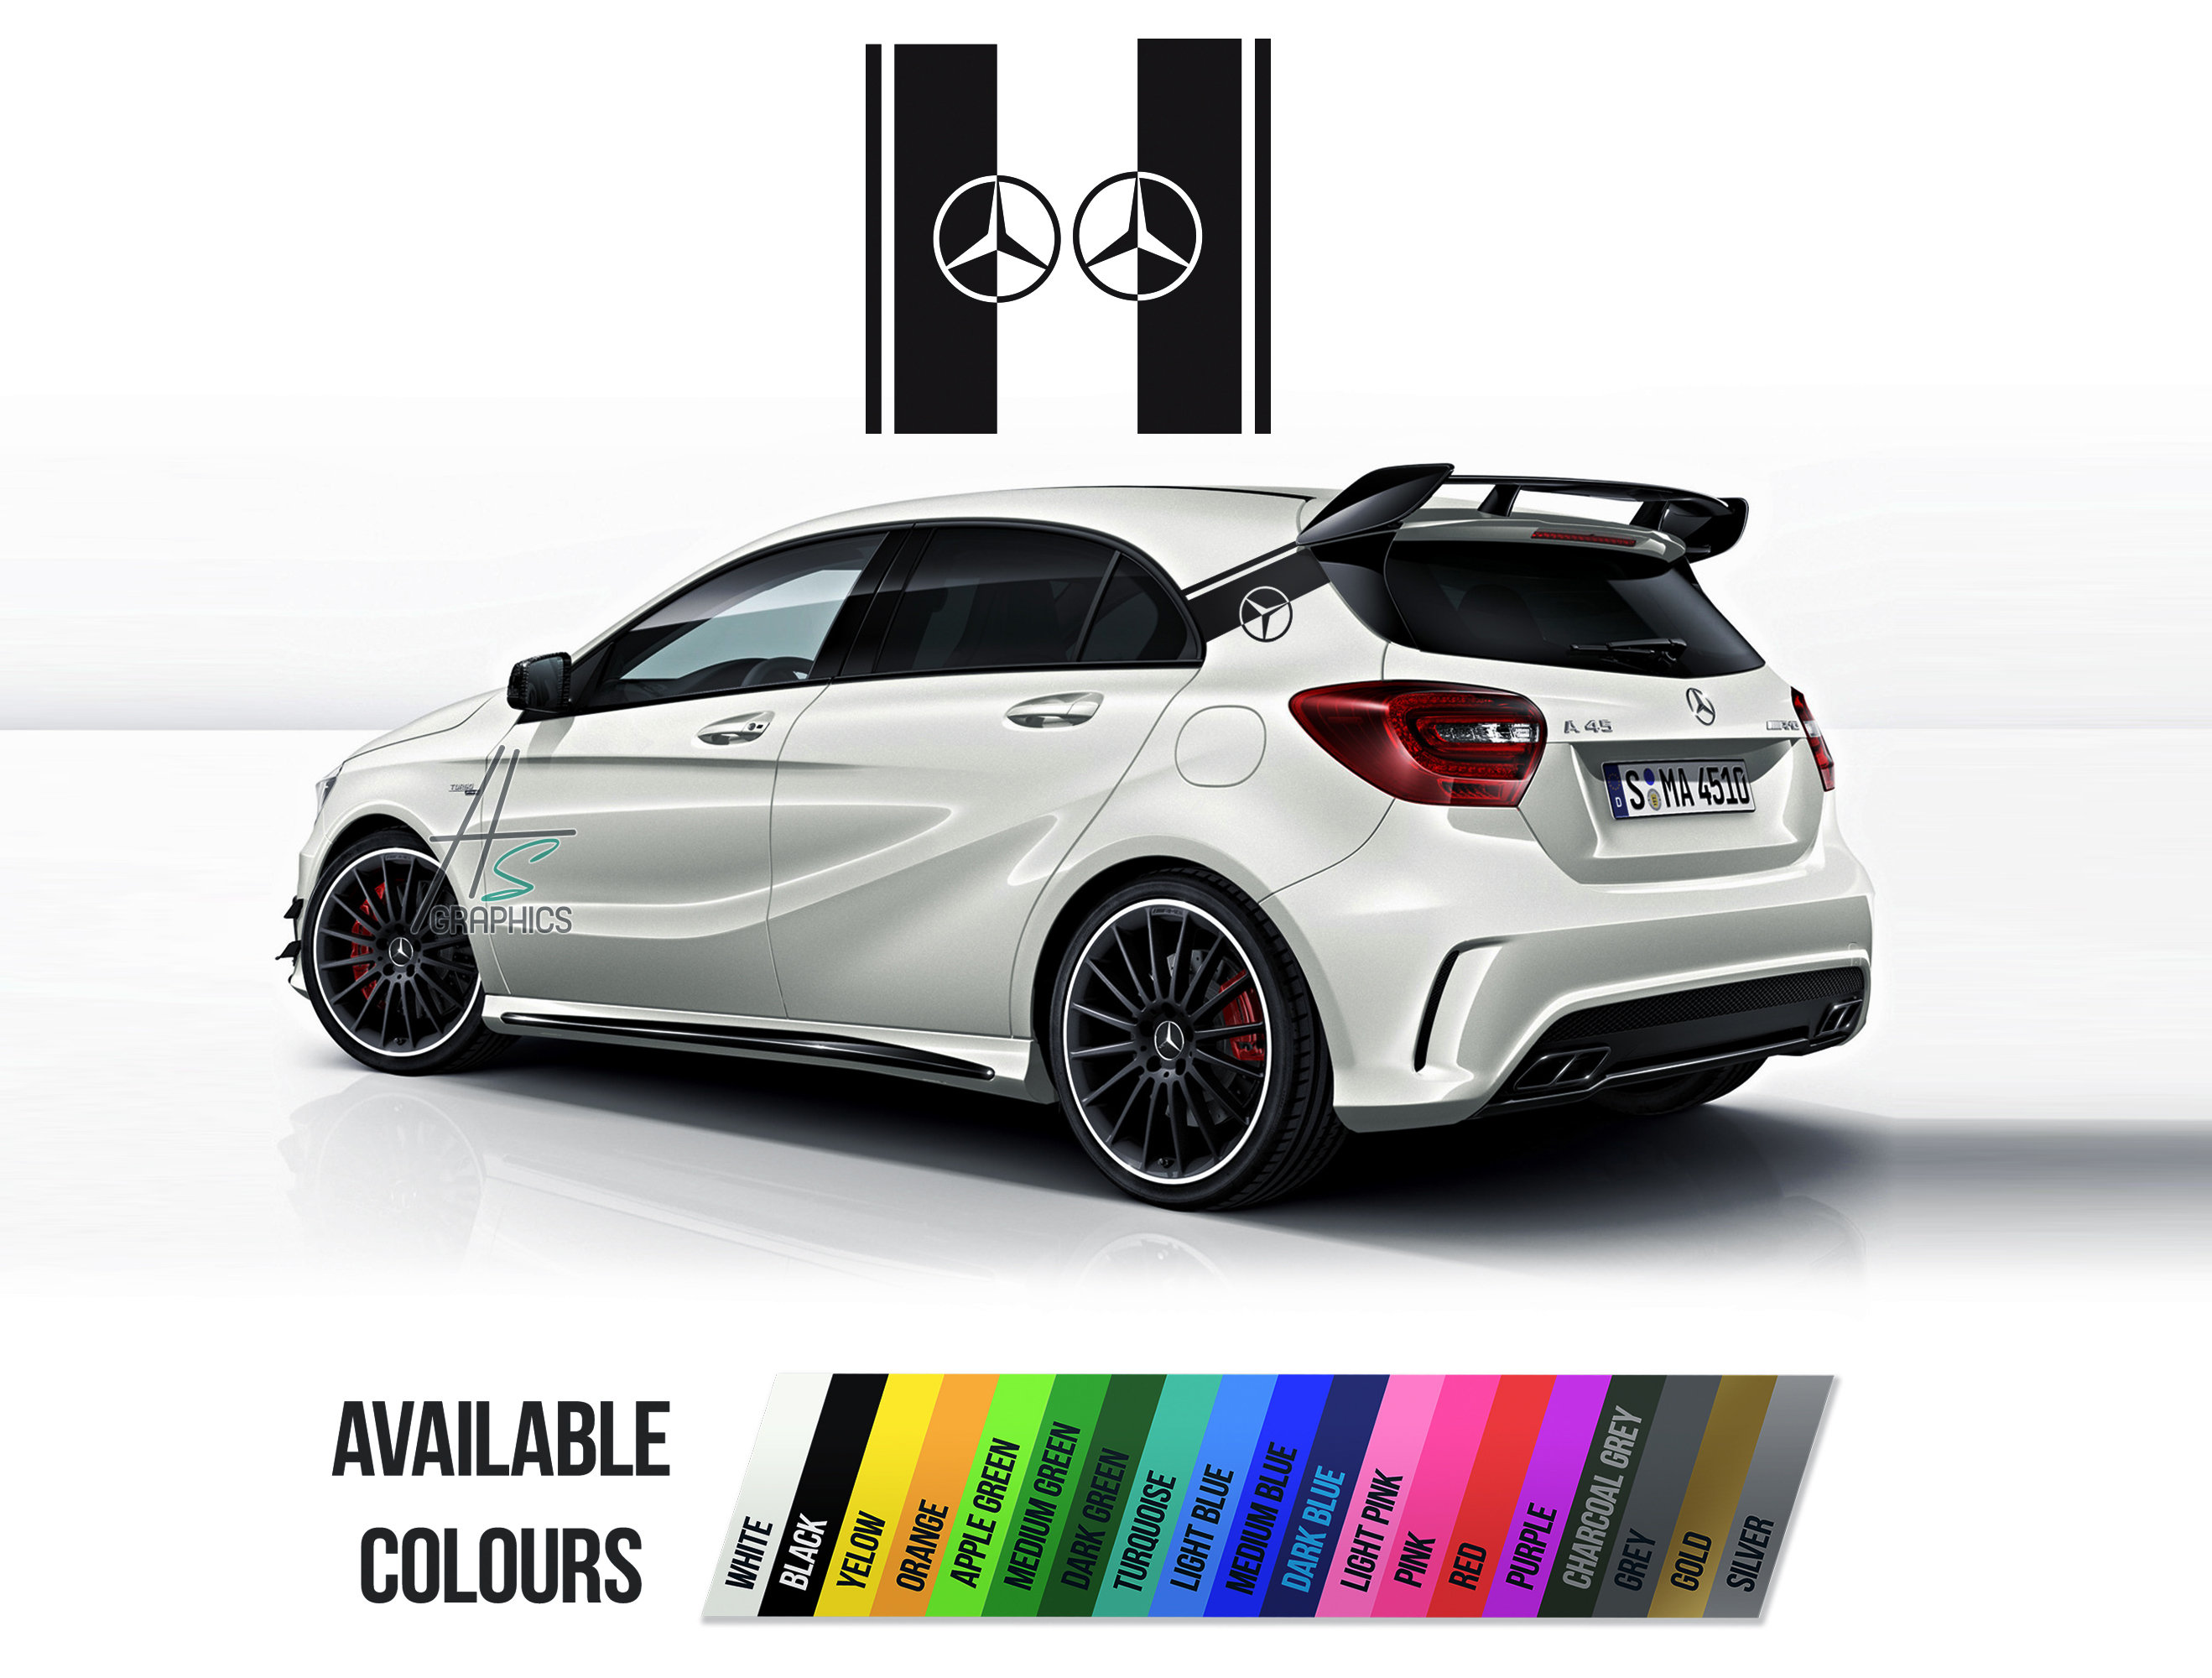 2 SIDE SKIRT stickers powered by mercedes-benz amg sponsor rally tuning  decal £4.99 - PicClick UK